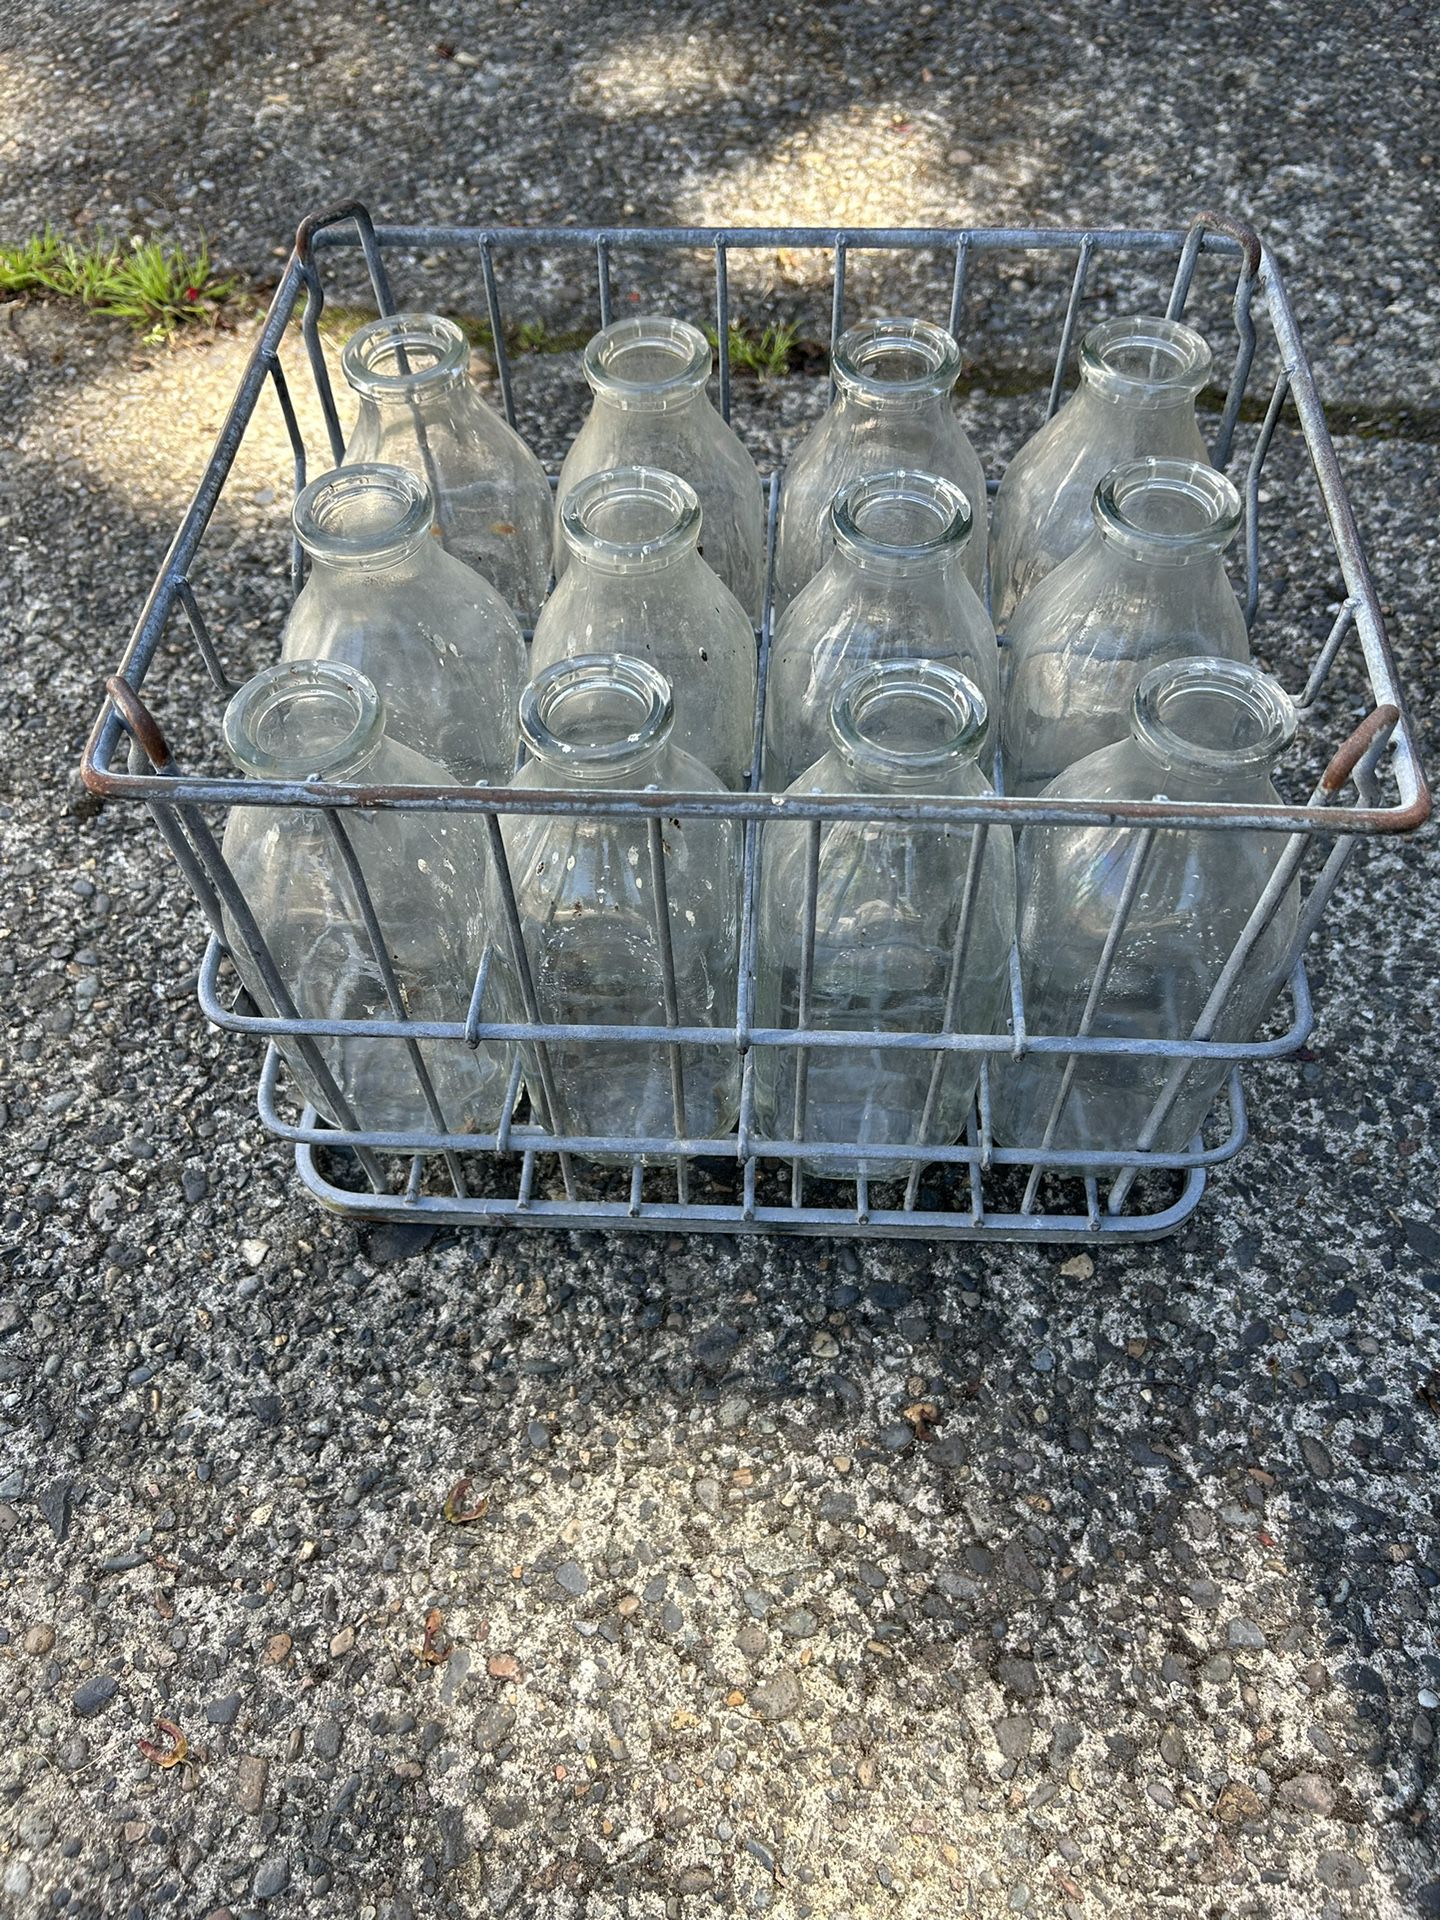 Vintage Milk Crate With One Dozen Milk Jugs. All In Good Condition.